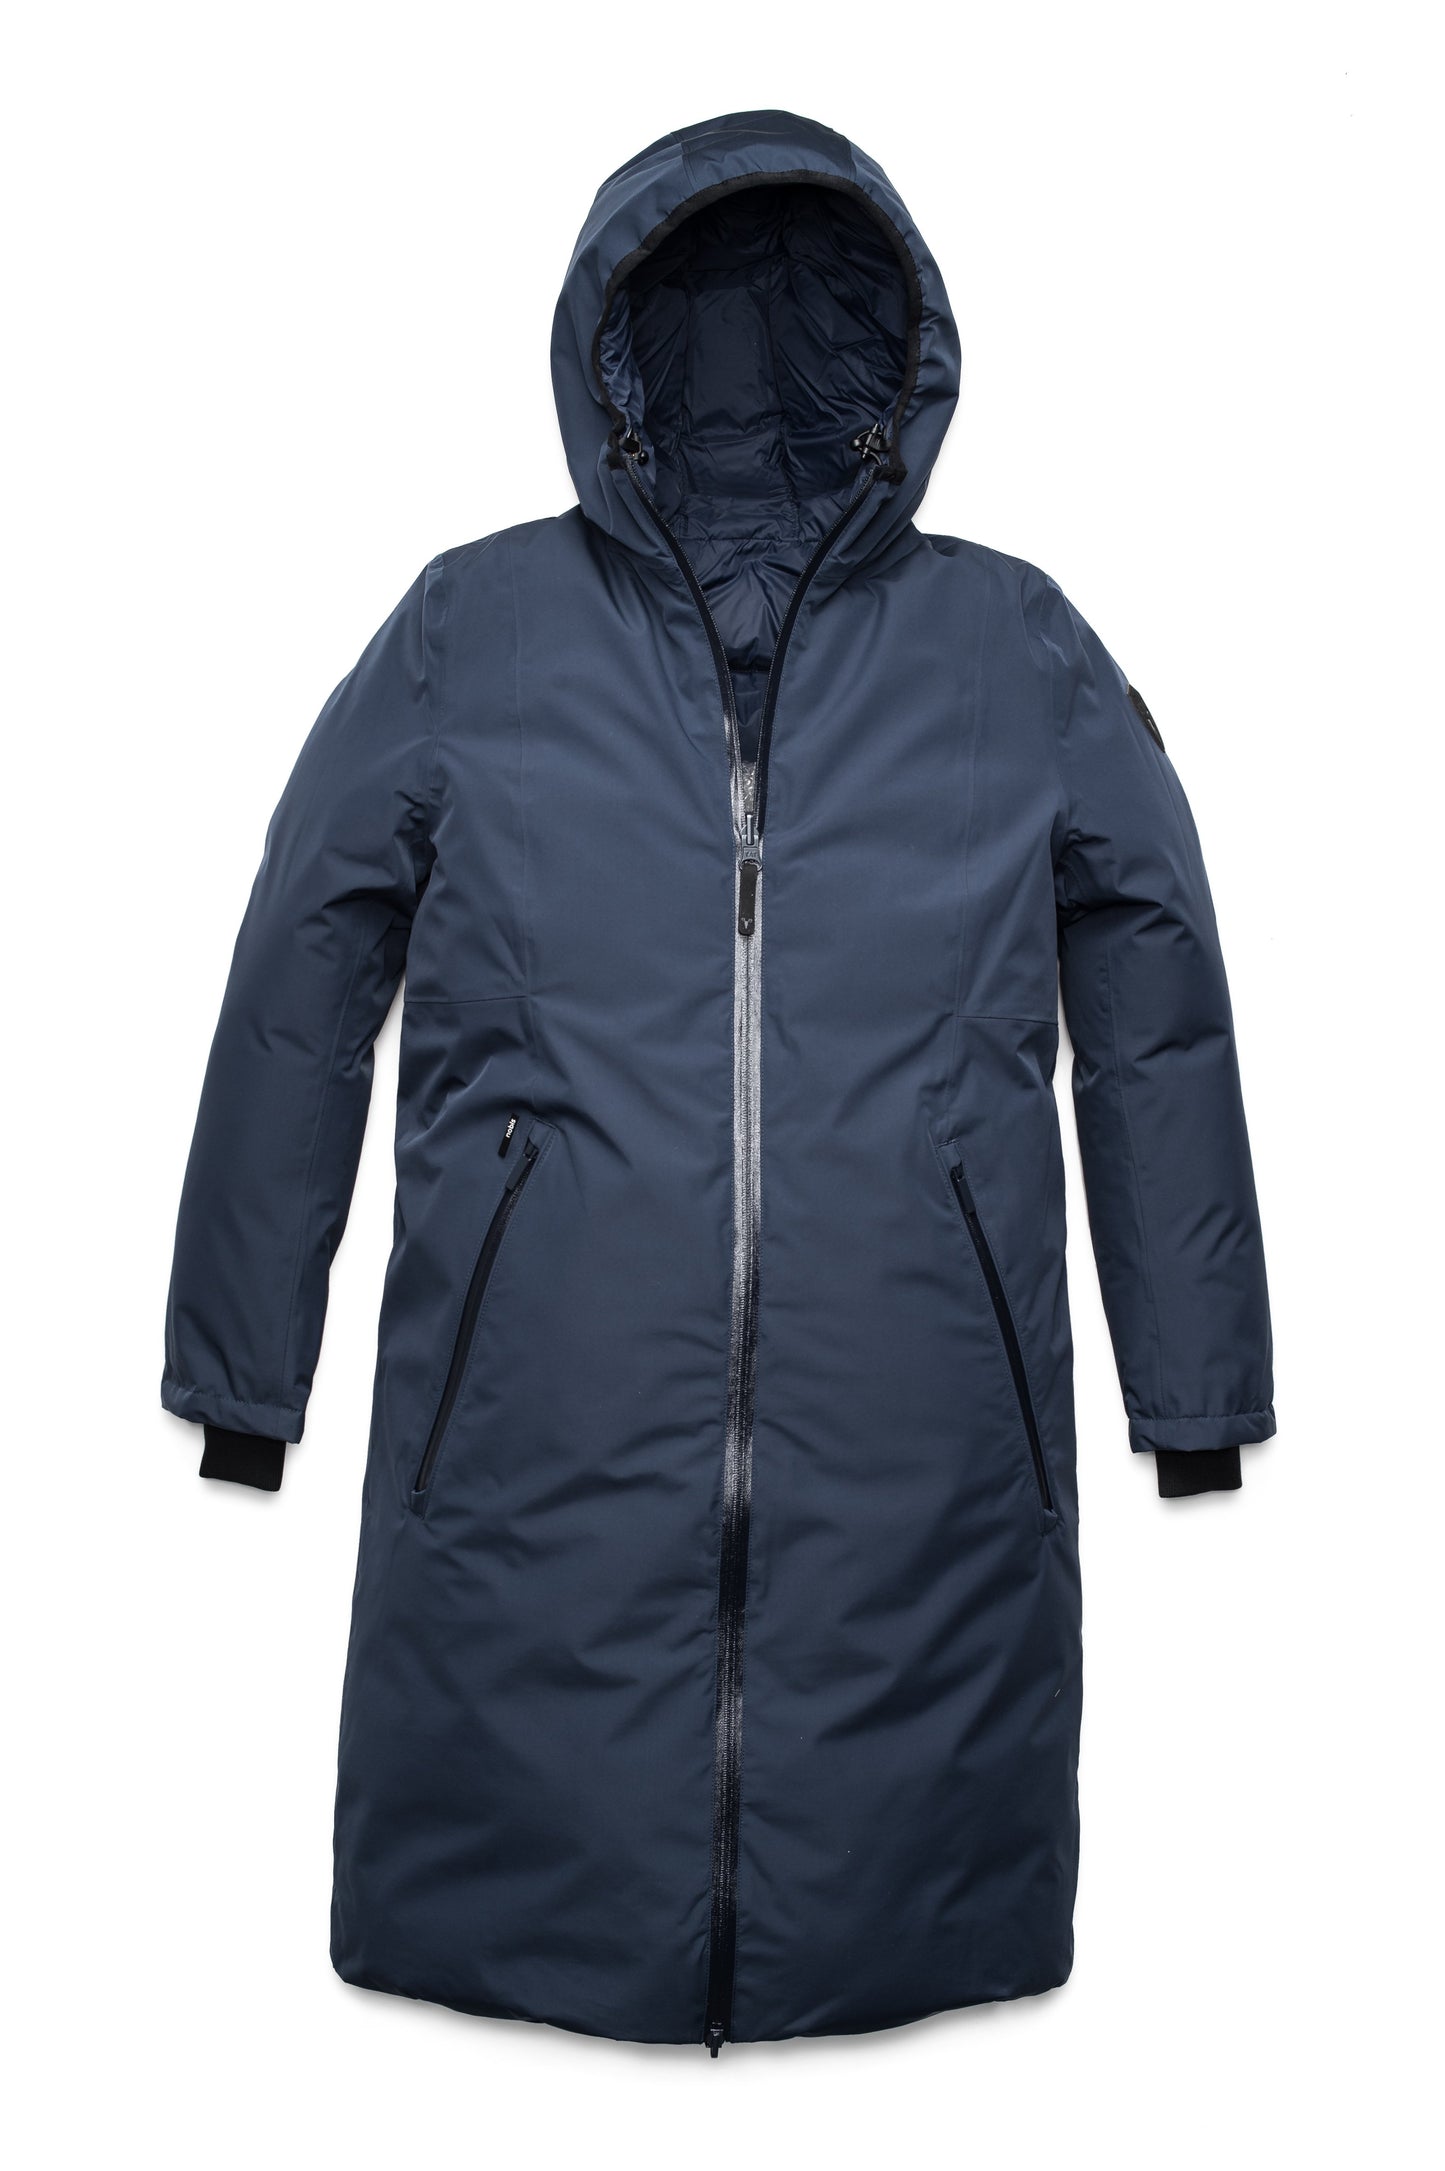 Ladies knee length reversible down-filled parka with non-removable hood in Marine